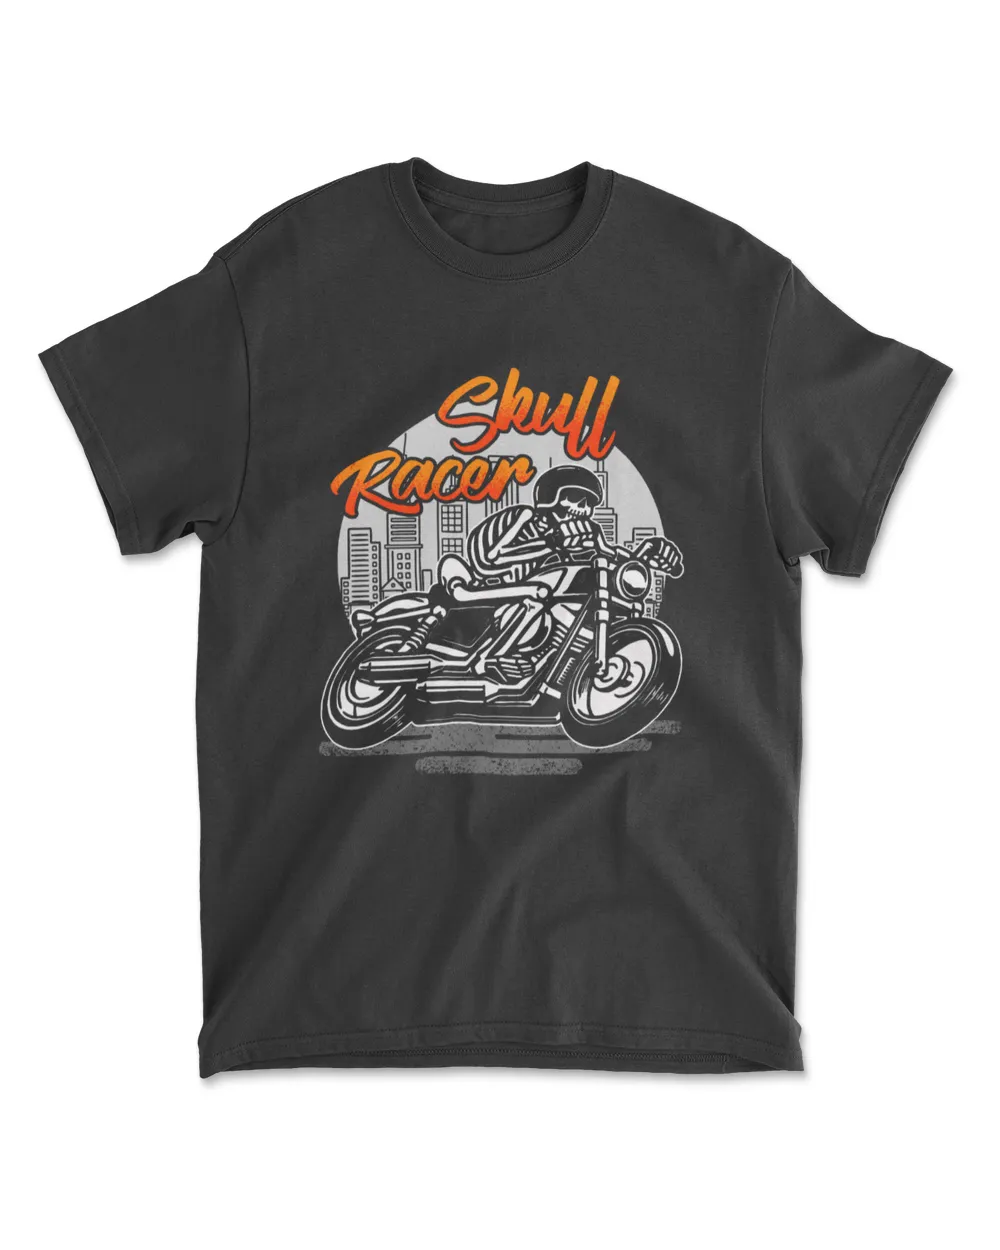 Skull Racer With Motorcycles Super Speed